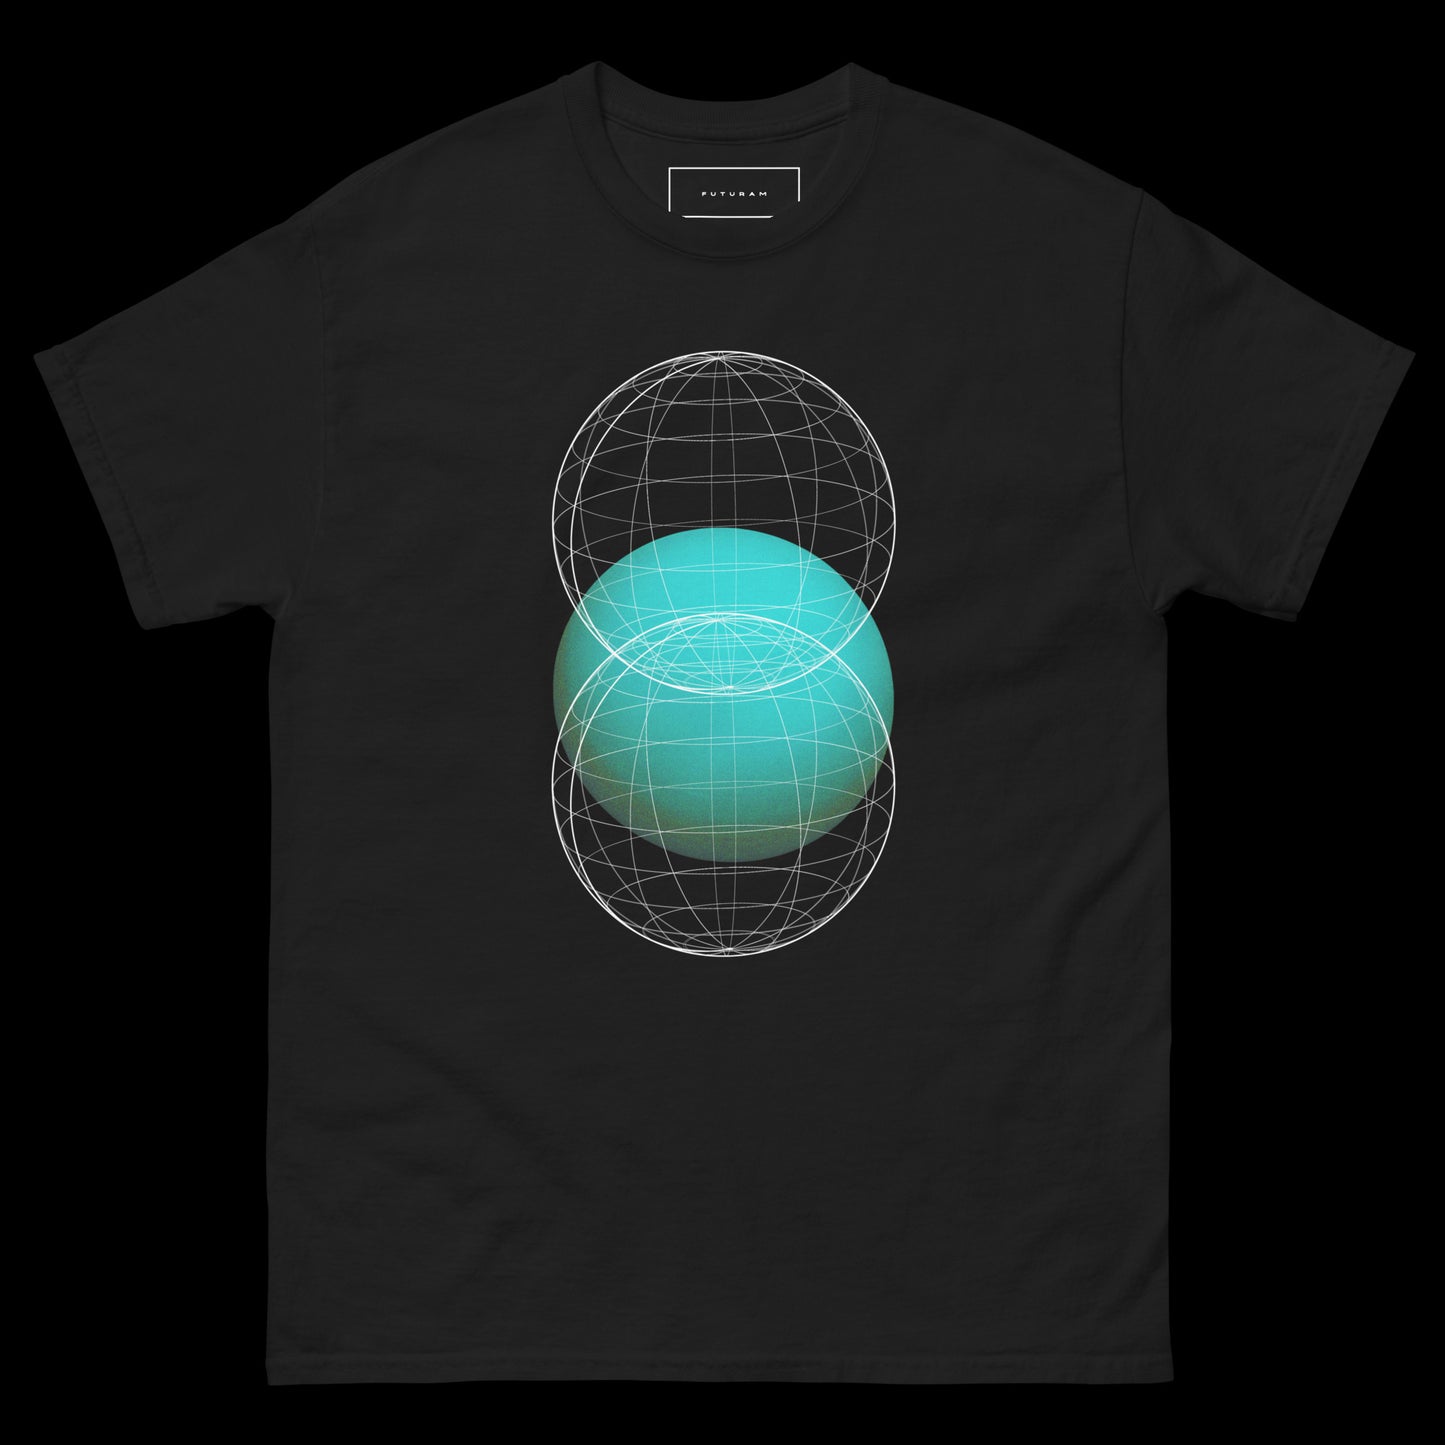 "The First Contact" - Universal T-Shirt